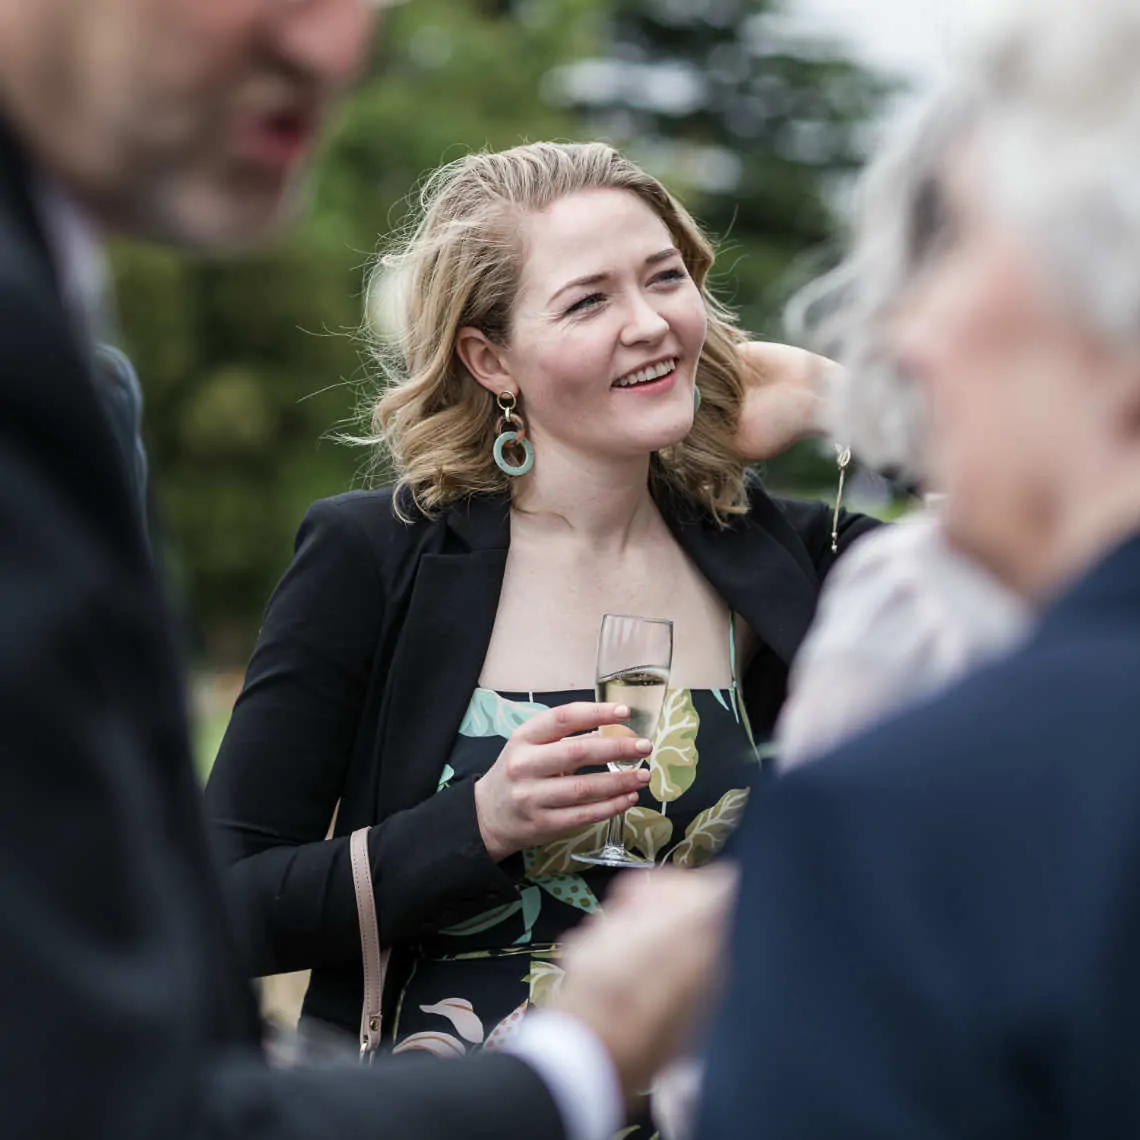 Lady smiling at outdoor drinks reception